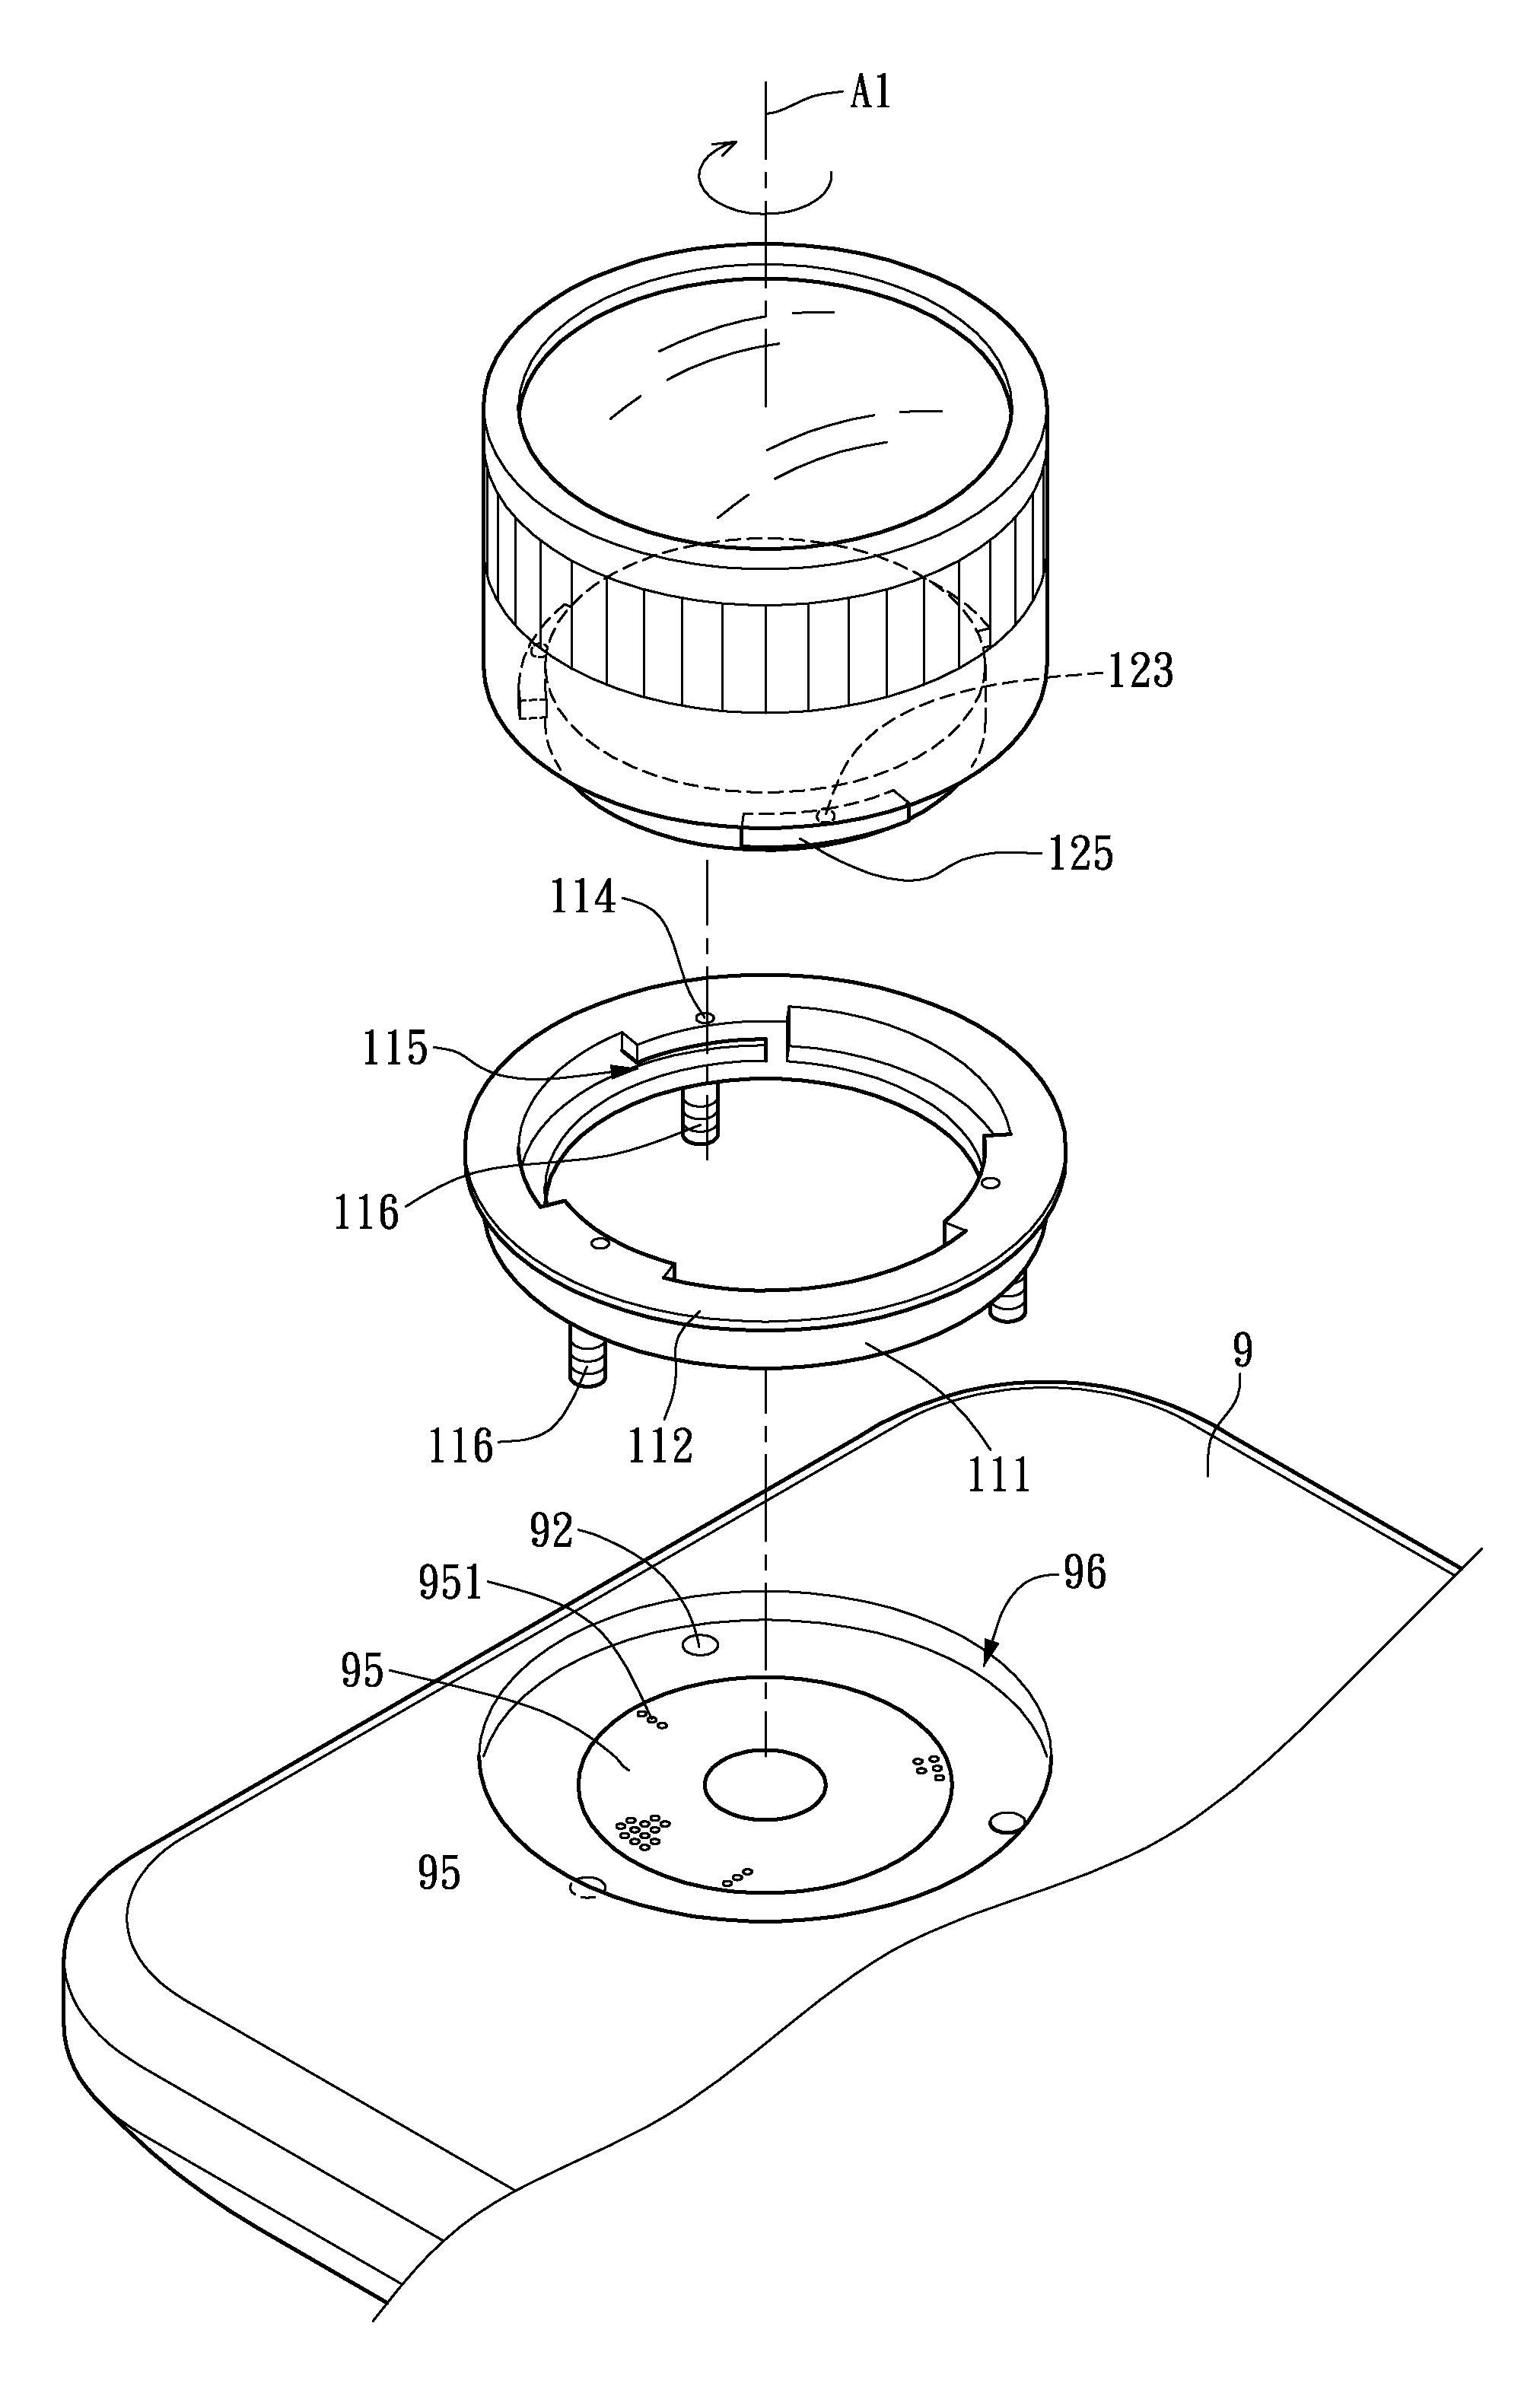 Attachable assembly